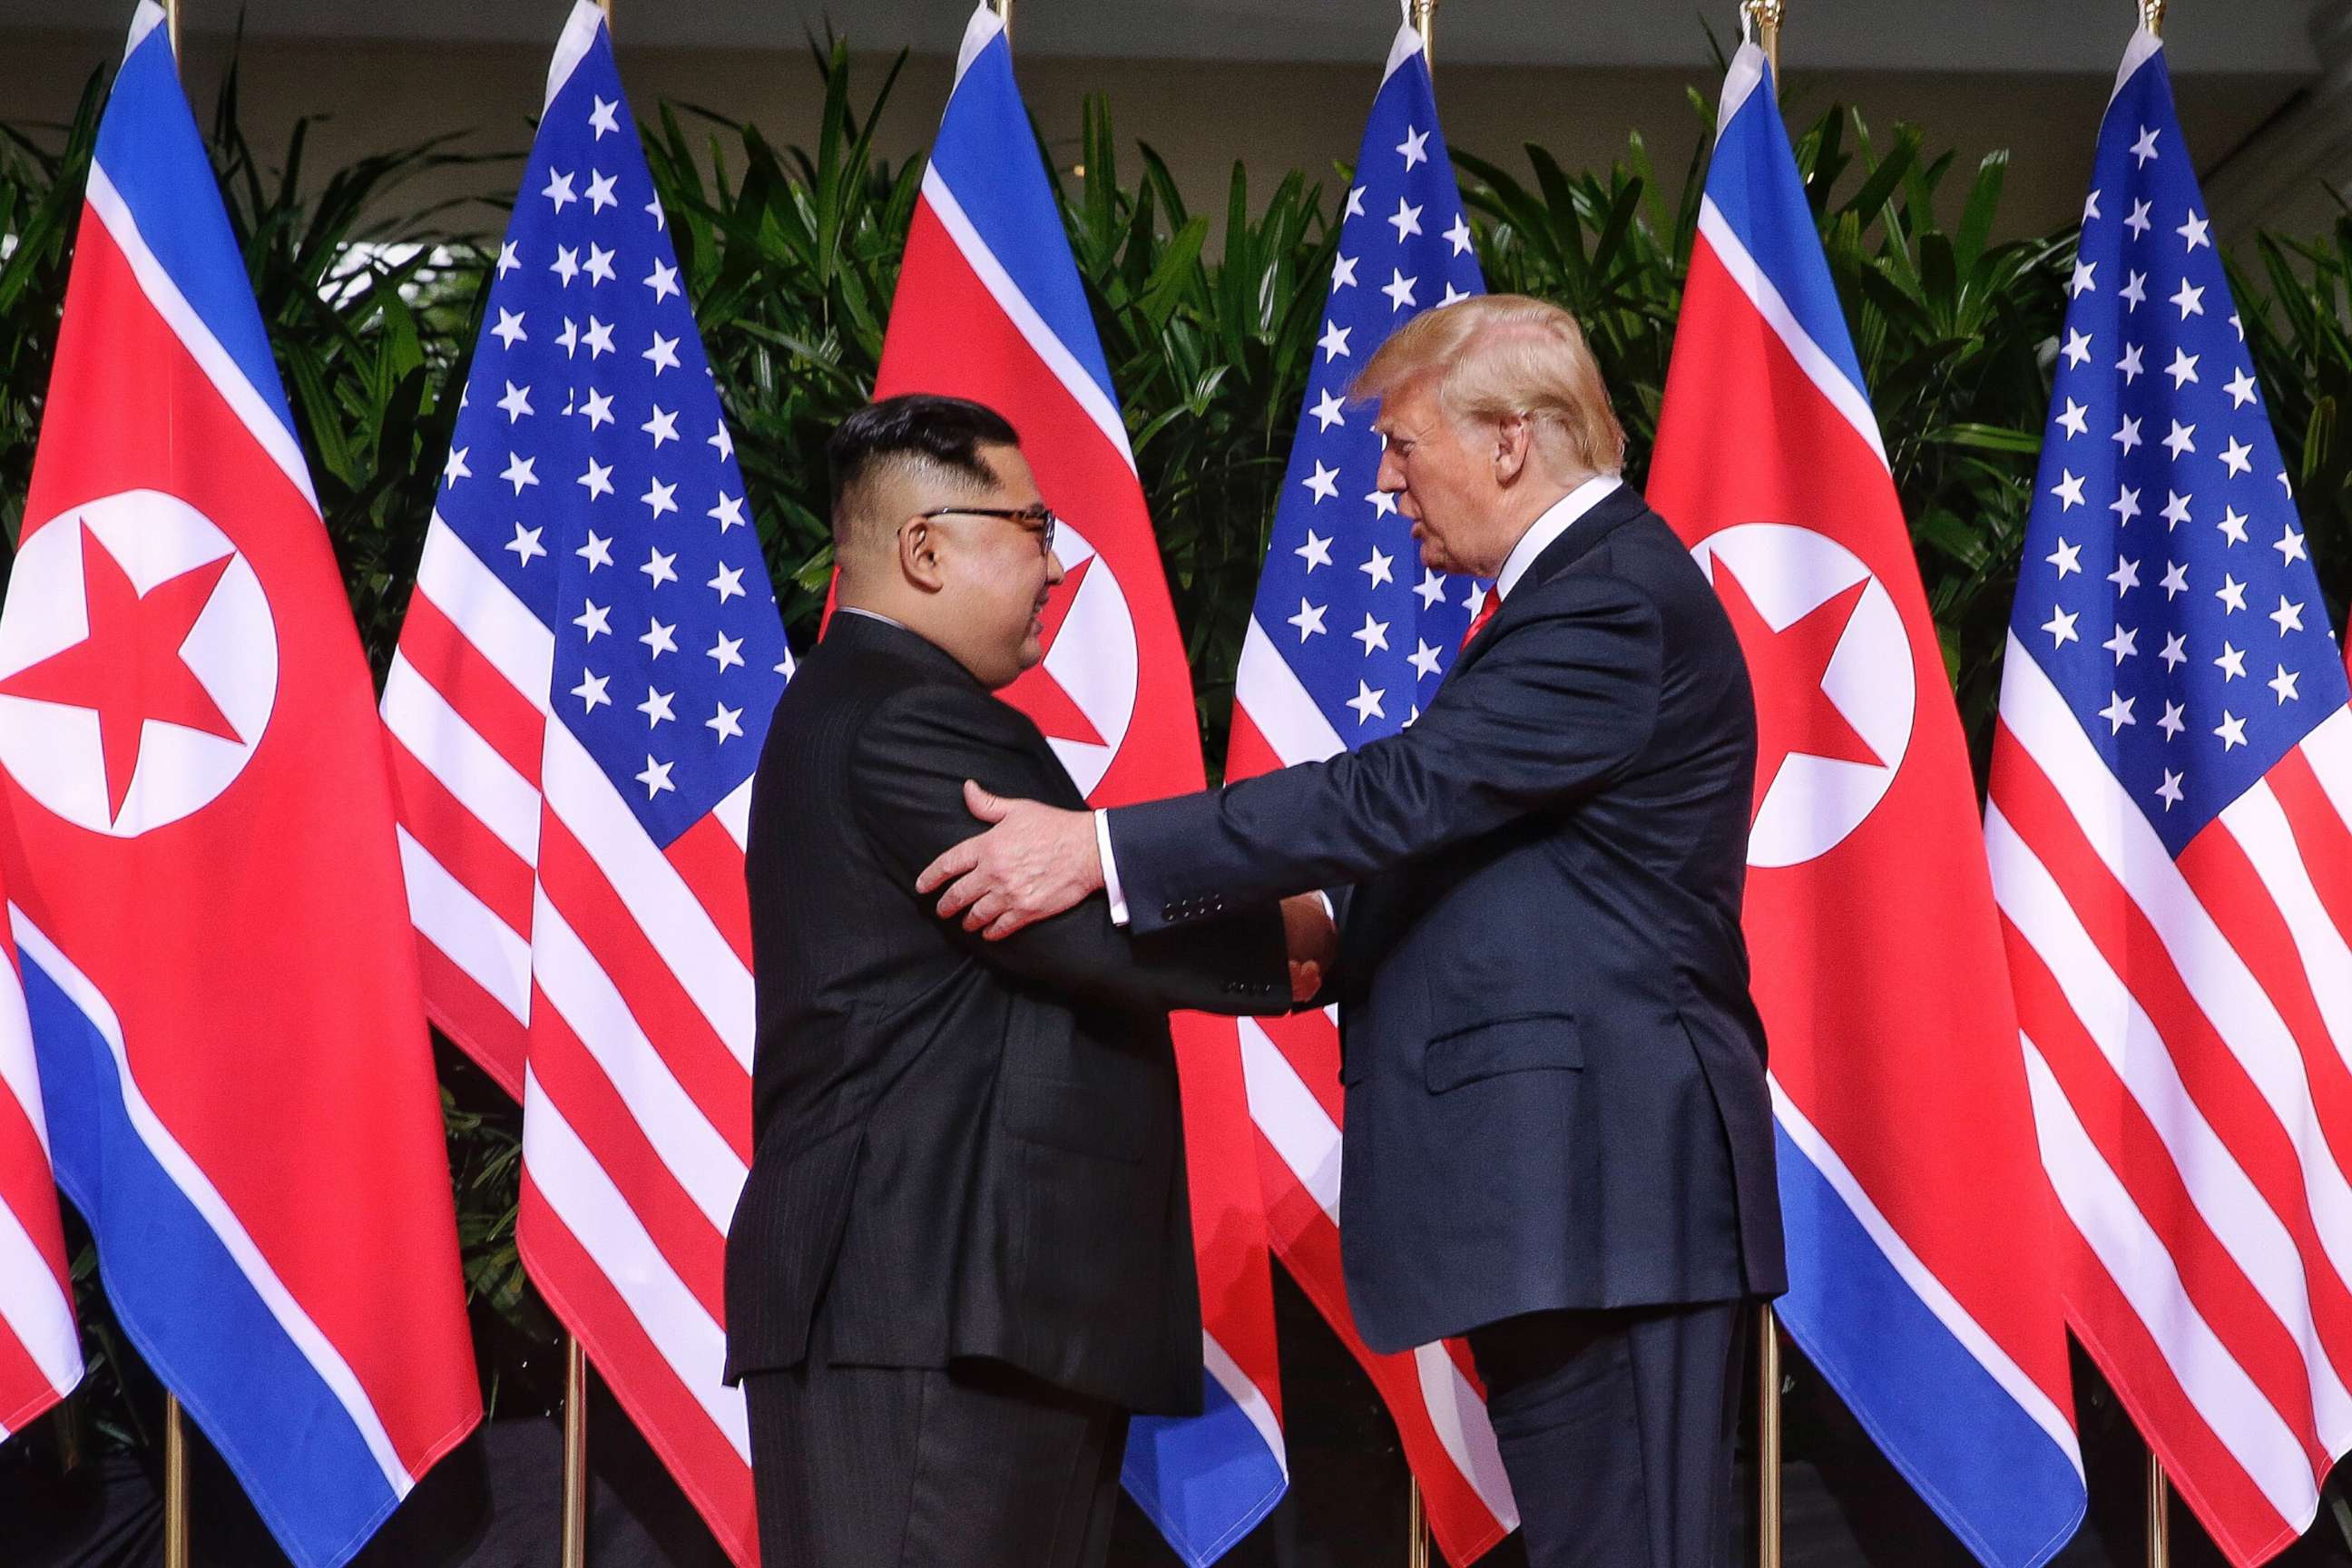 PHOTO: North Korean leader Kim Jong-un shakes hands with President Donald Trump during their historic U.S.-DPRK summit at the Capella Hotel on Sentosa island on June 12, 2018 in Singapore.